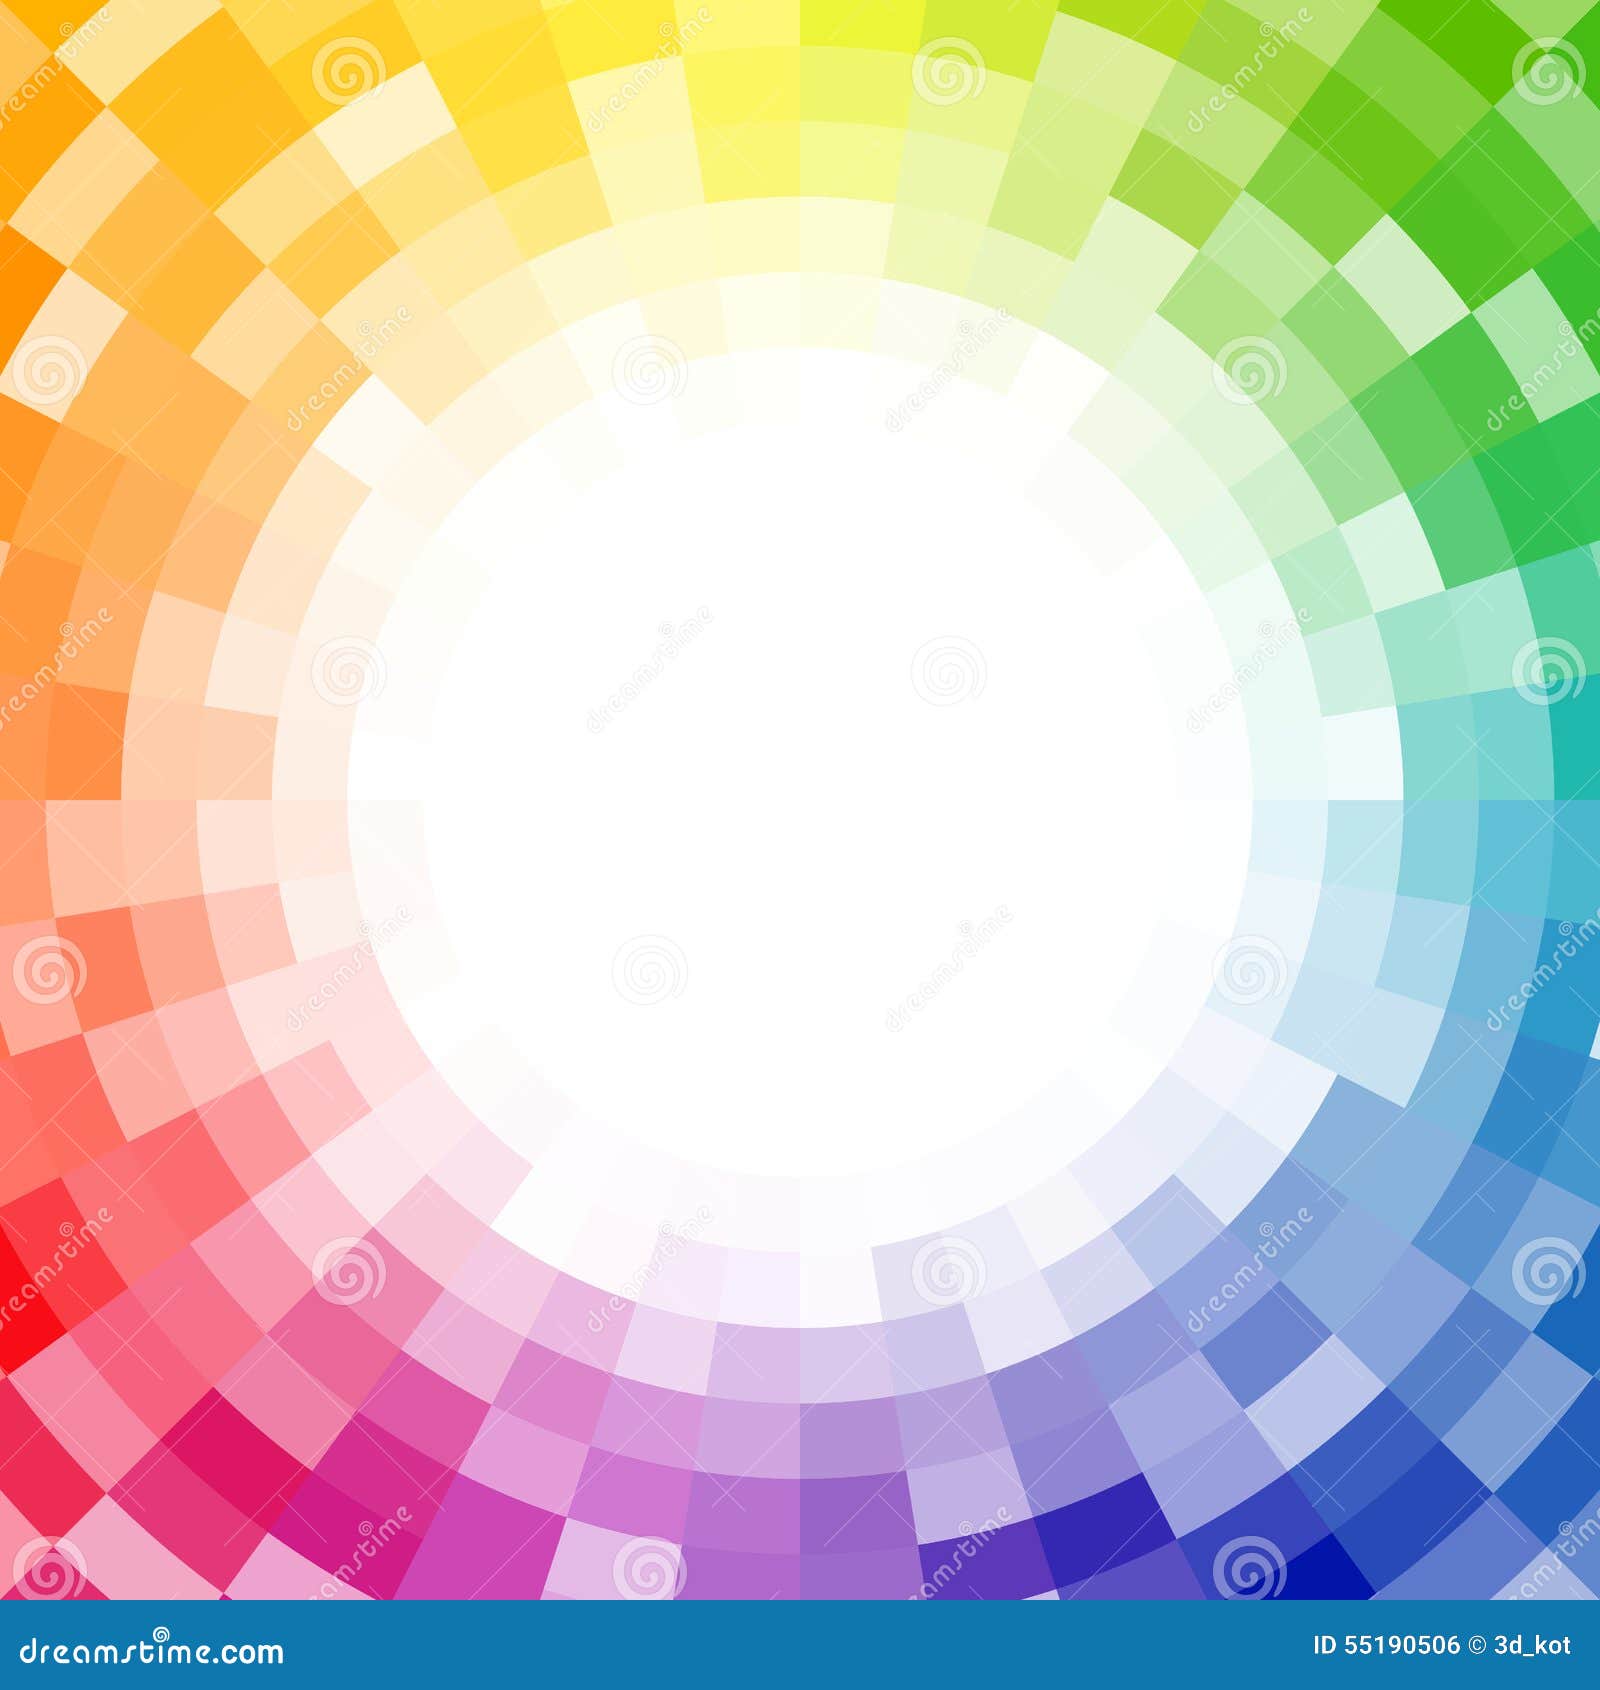 abstract pixelated color wheel background